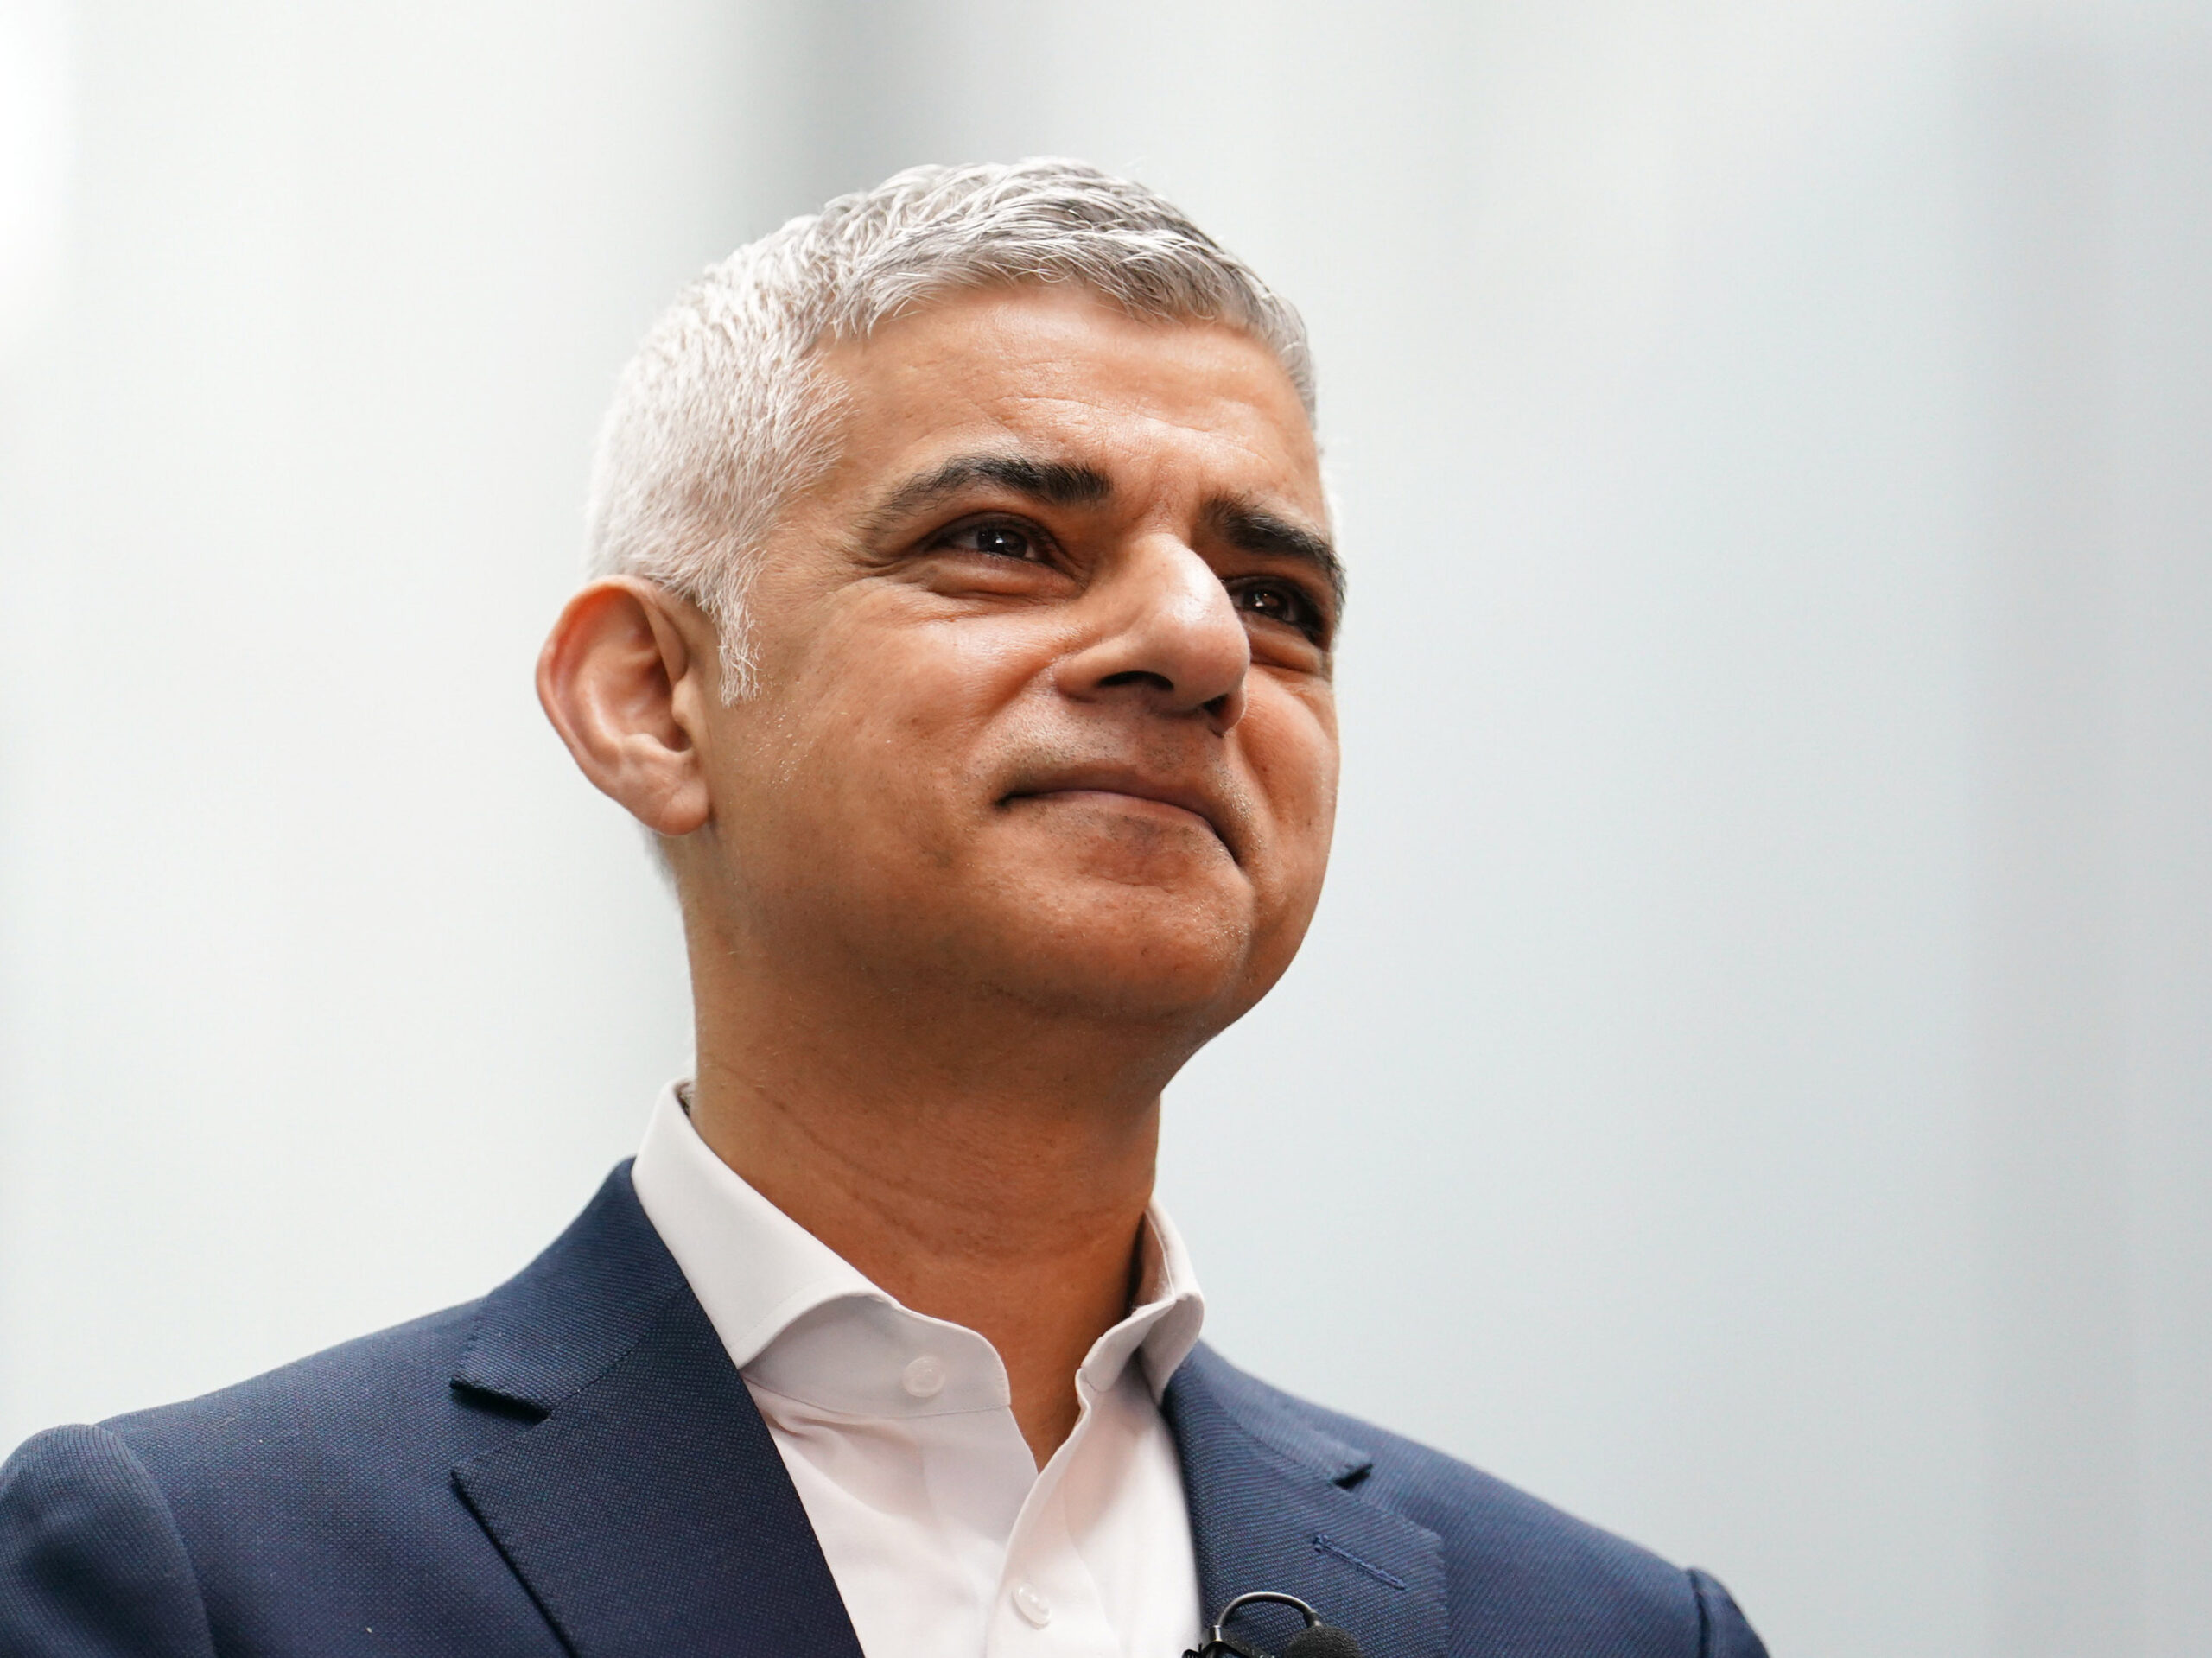 Why London’s Muslim mayor needs the same security as the king